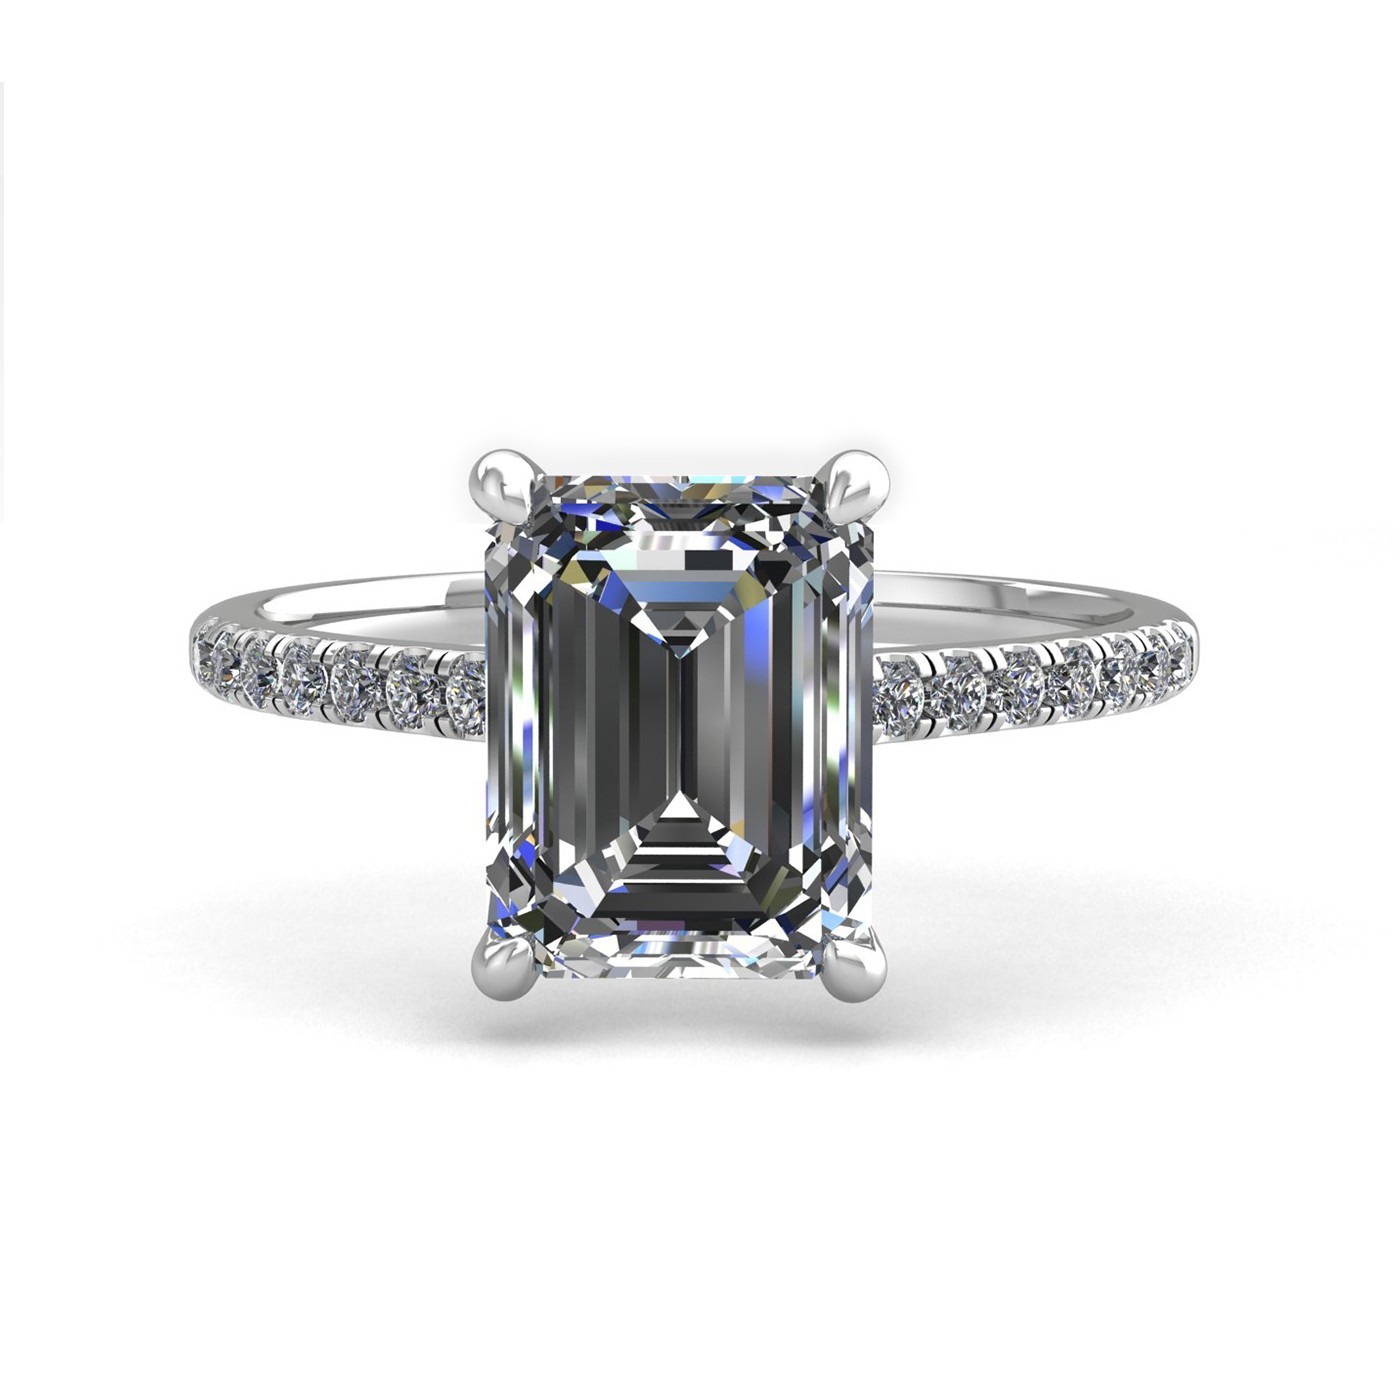 18k white gold 0,30 ct 4 prongs emerald cut diamond engagement ring with whisper thin pavÉ set band Photos & images